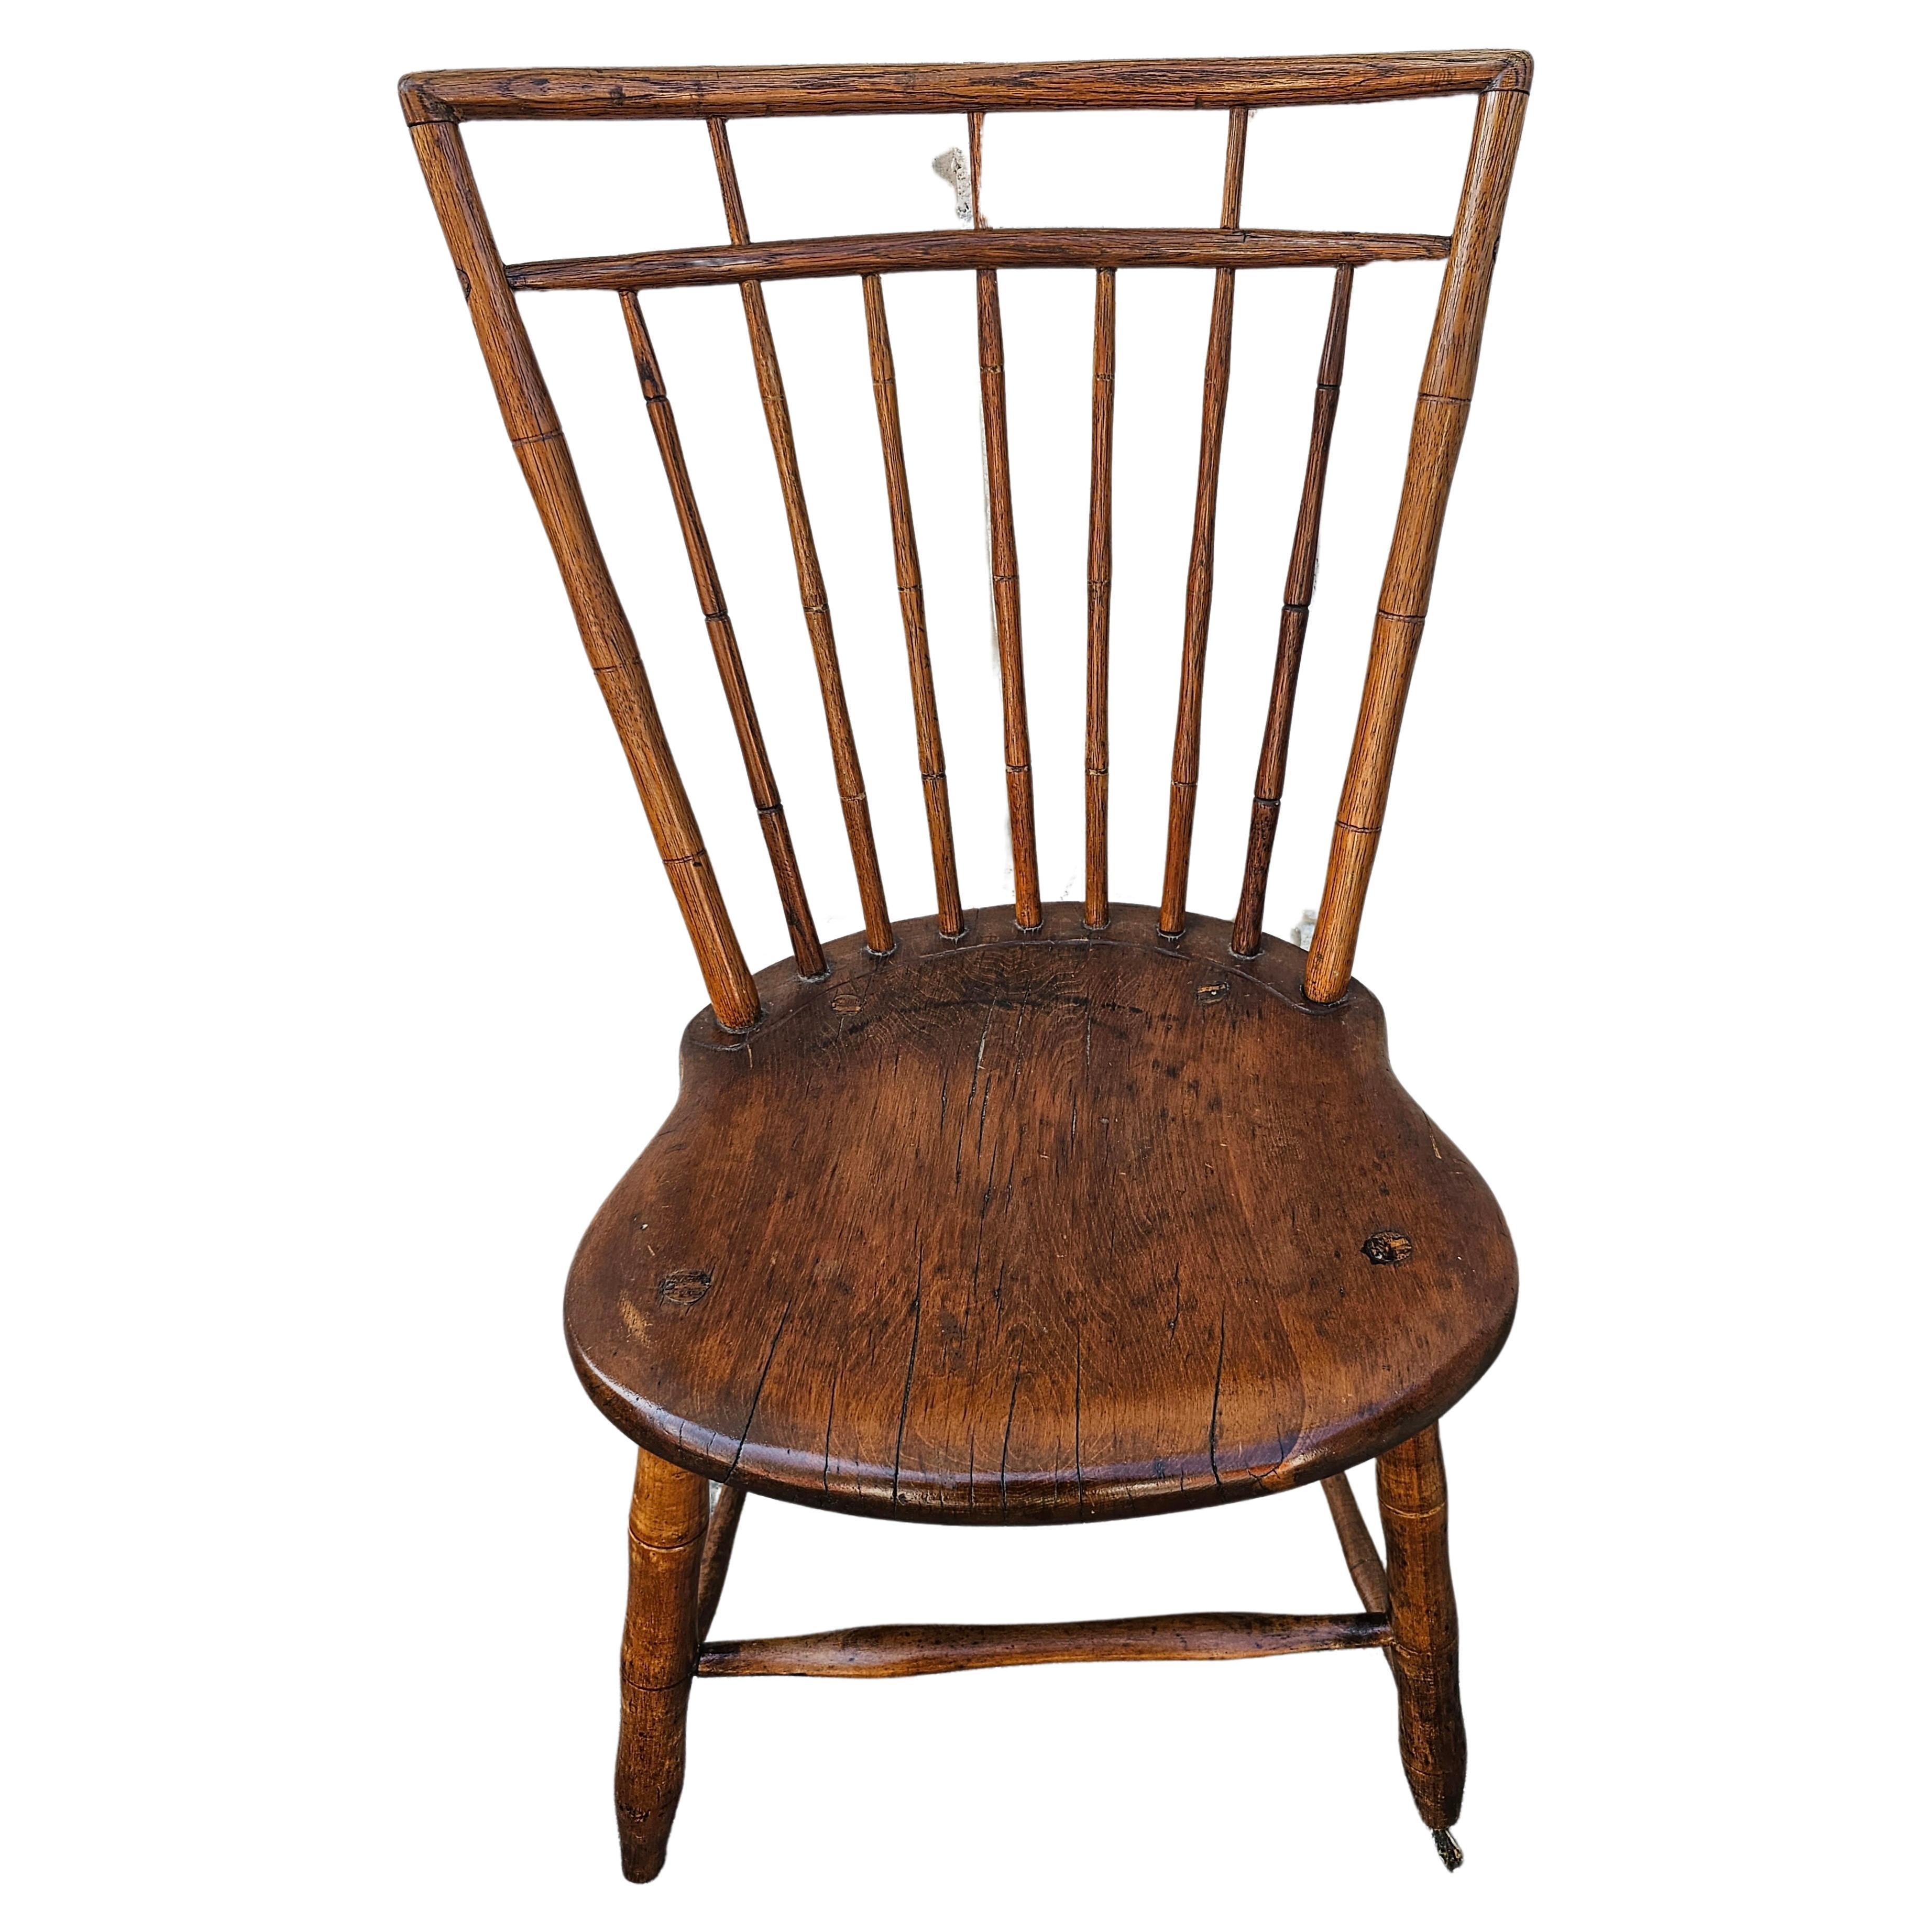 19th Century Early American Elm Windsor Plank Chair.Very sturdy.
Measures 17